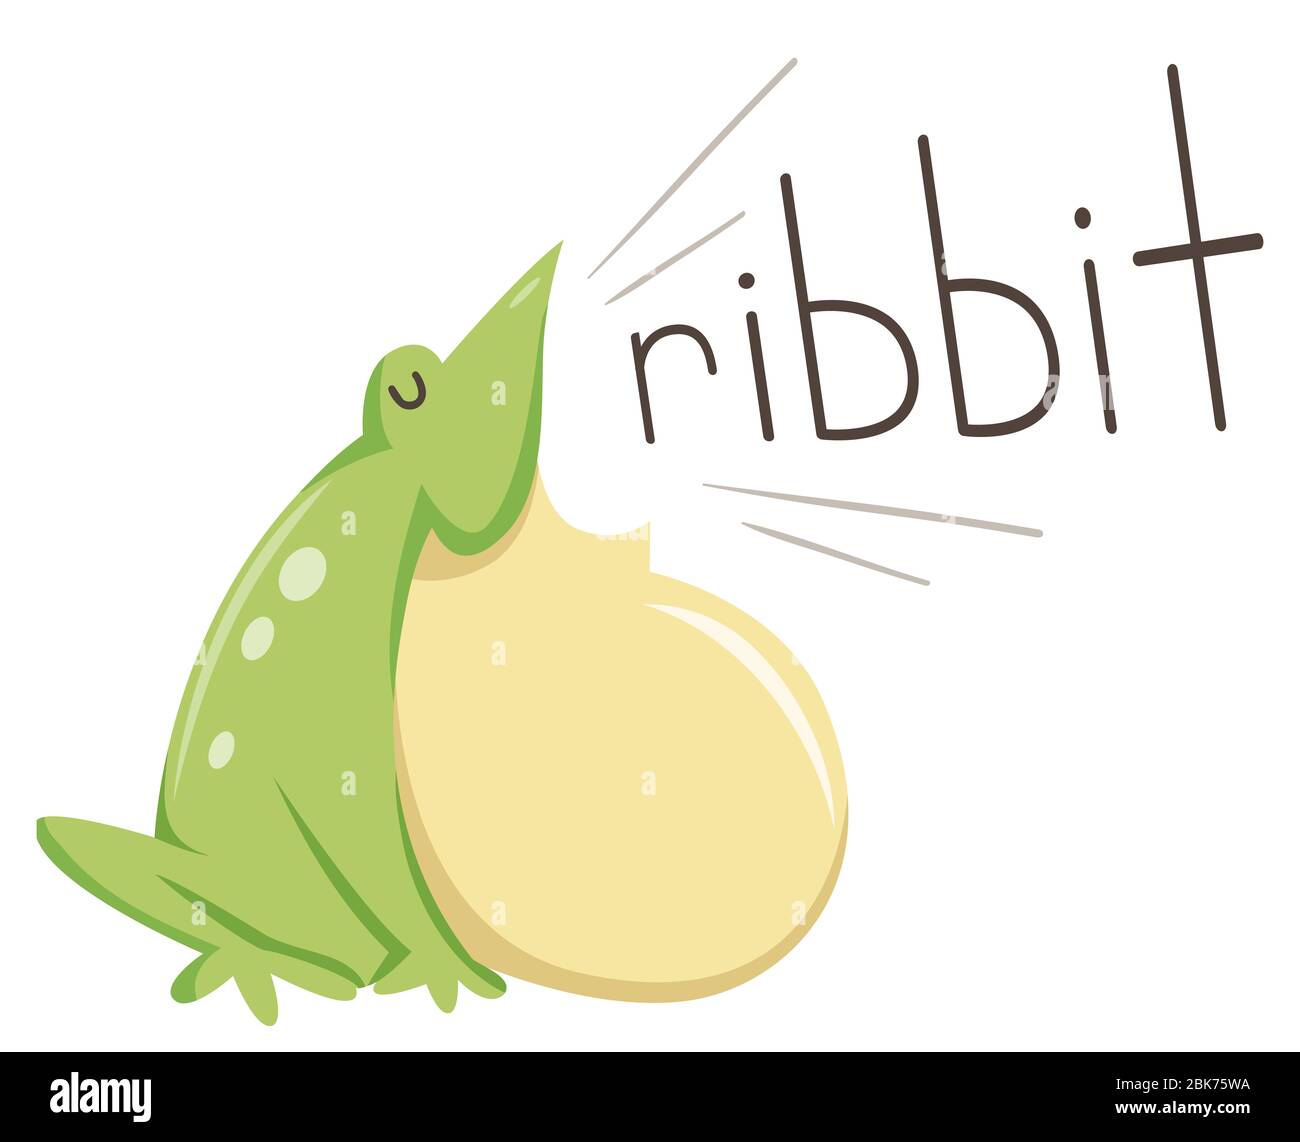 Illustration of a Frog with Big Belly Making a Ribbit Sound Stock Photo -  Alamy